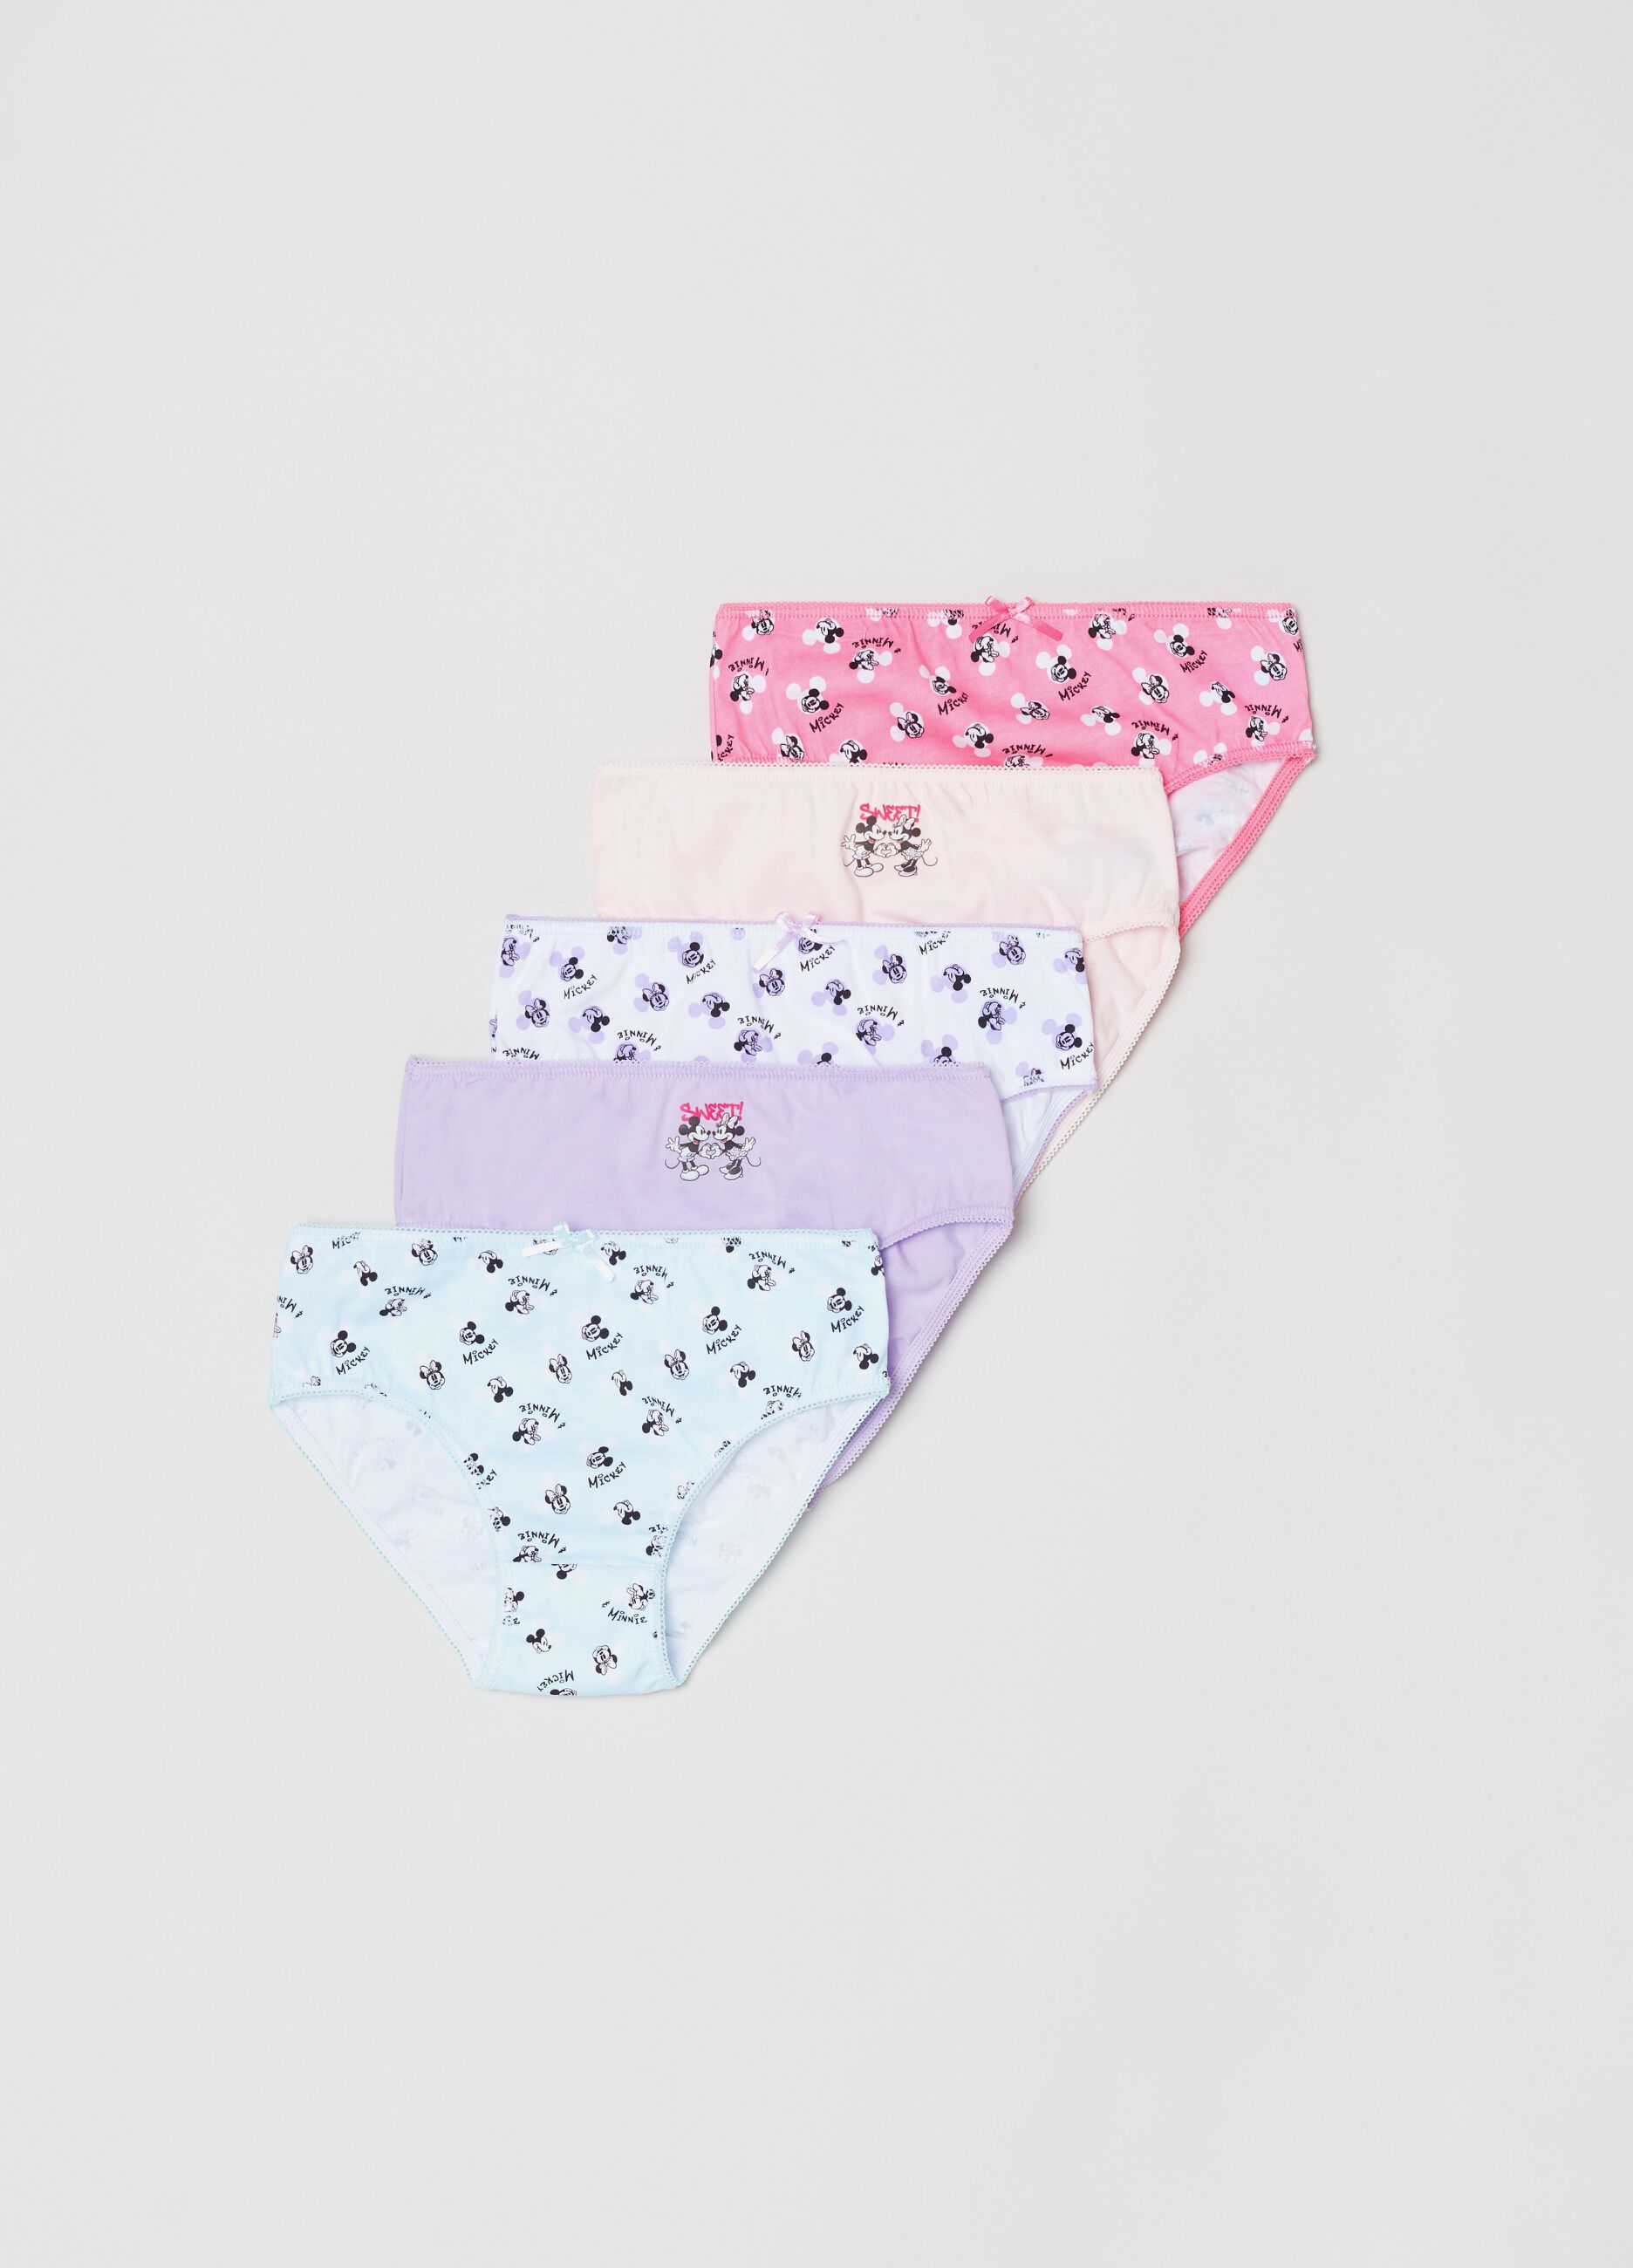 Five-pack briefs with Minnie Mouse print